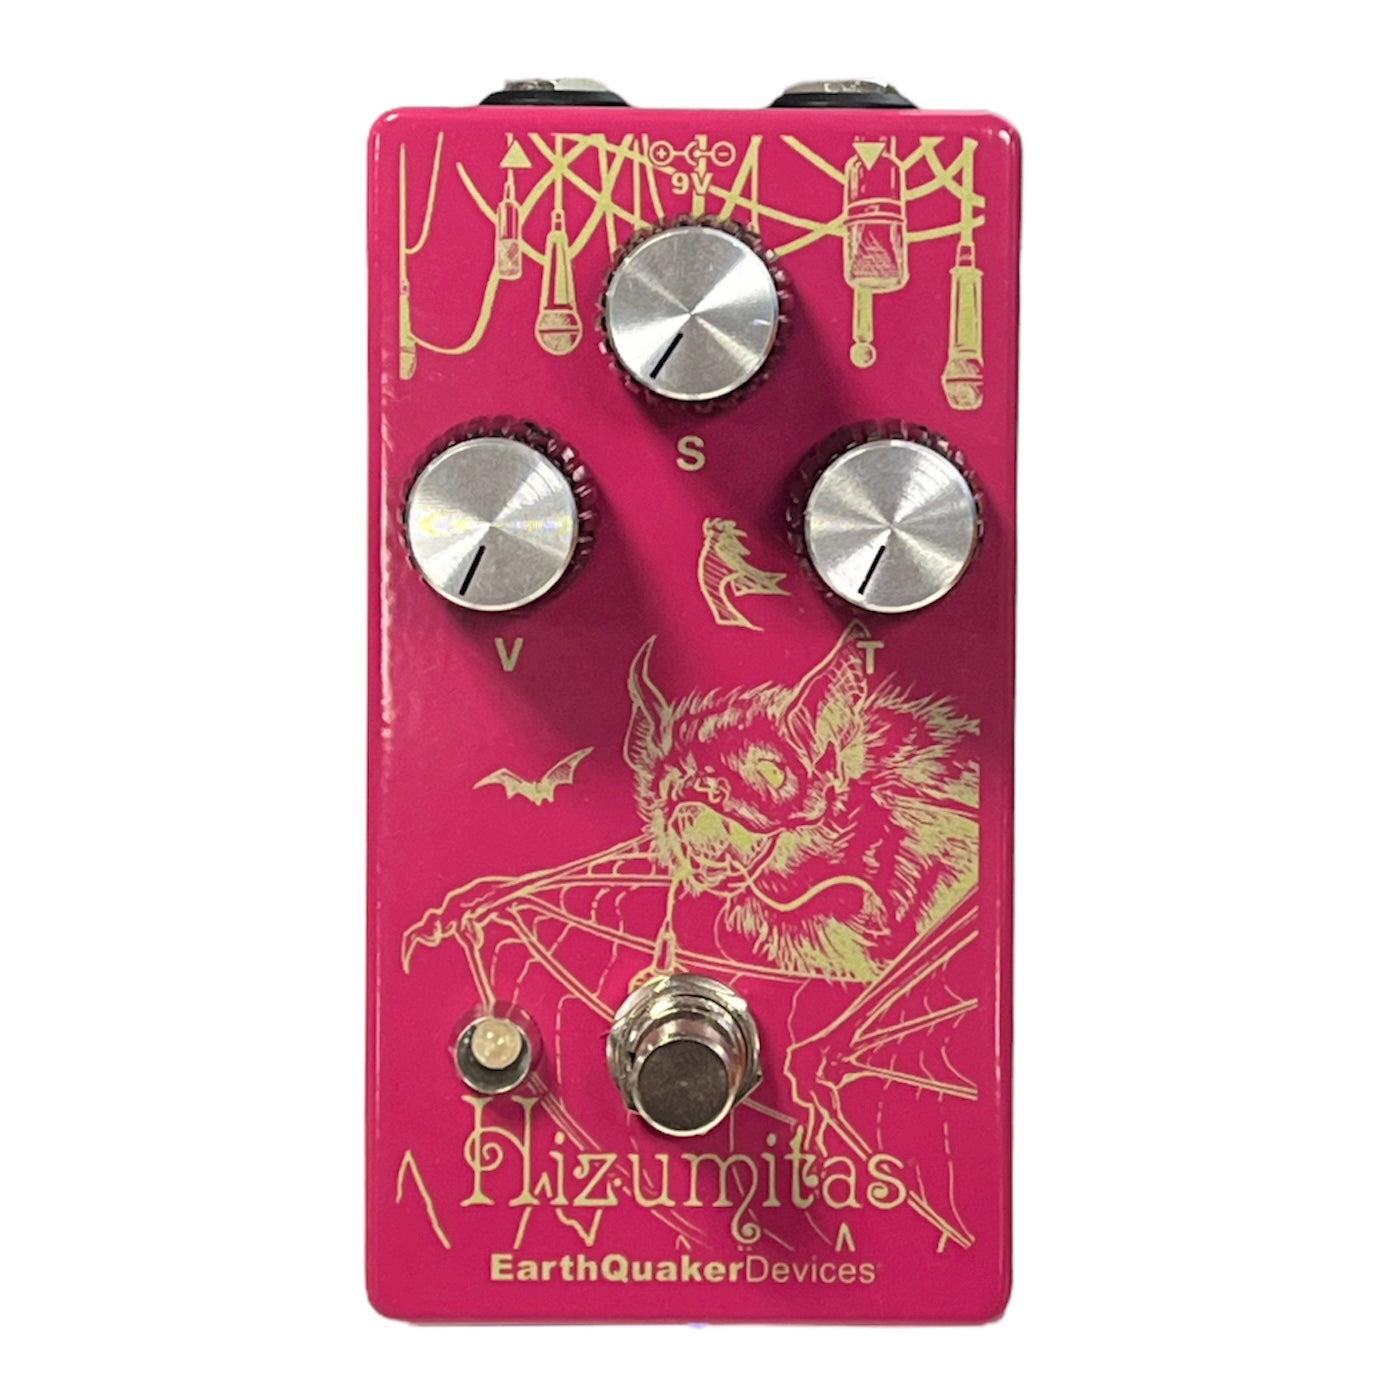 ROCK HALL X EARTHQUAKER DEVICES - LIMITED EDITION TELEMAGENTA